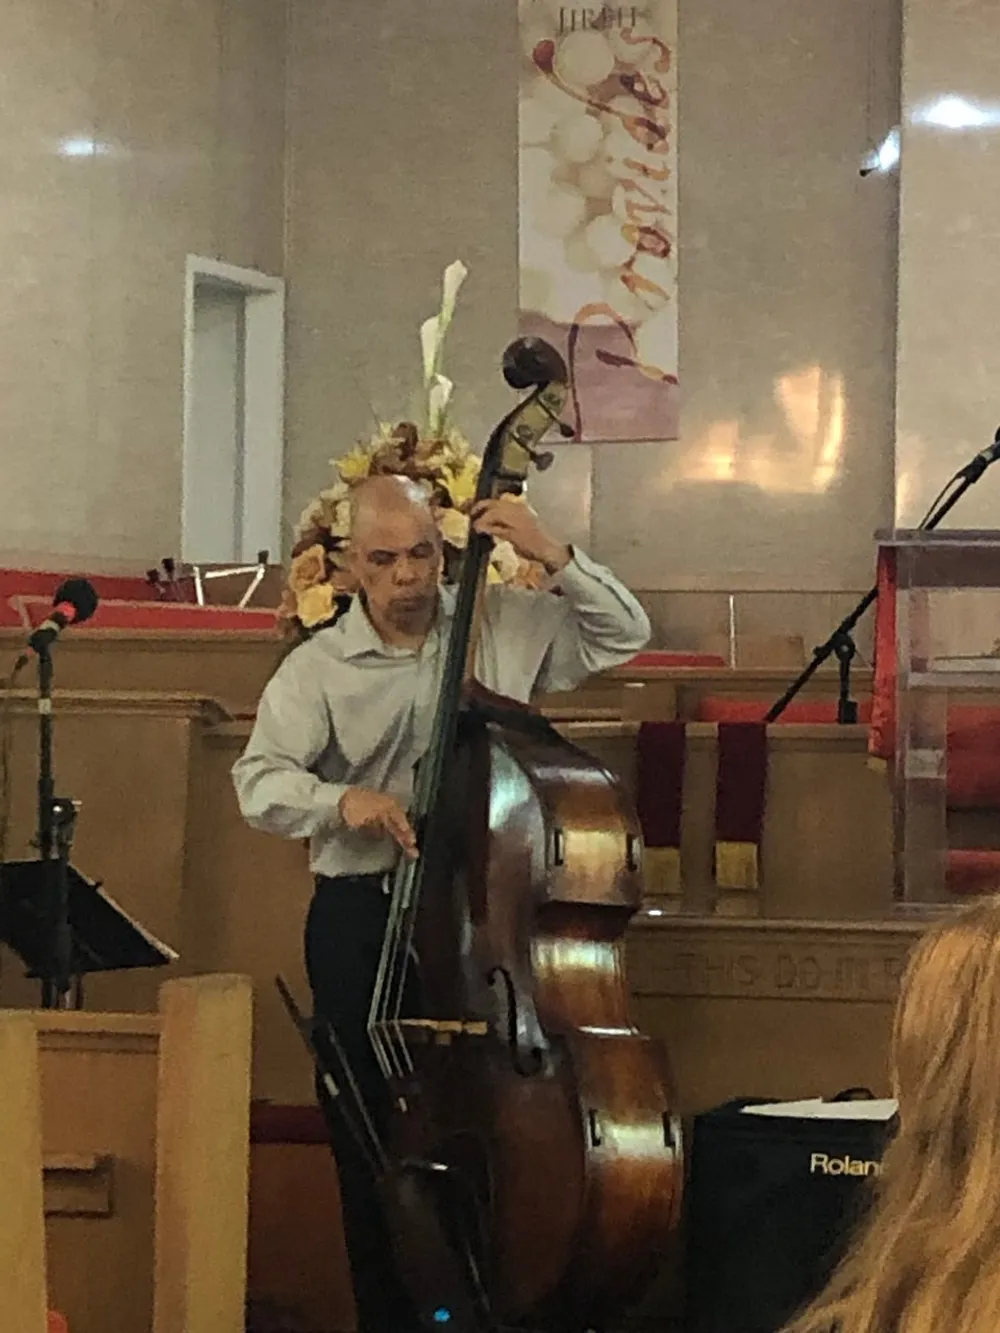 A person is playing a double bass in a room with a religious banner in the background